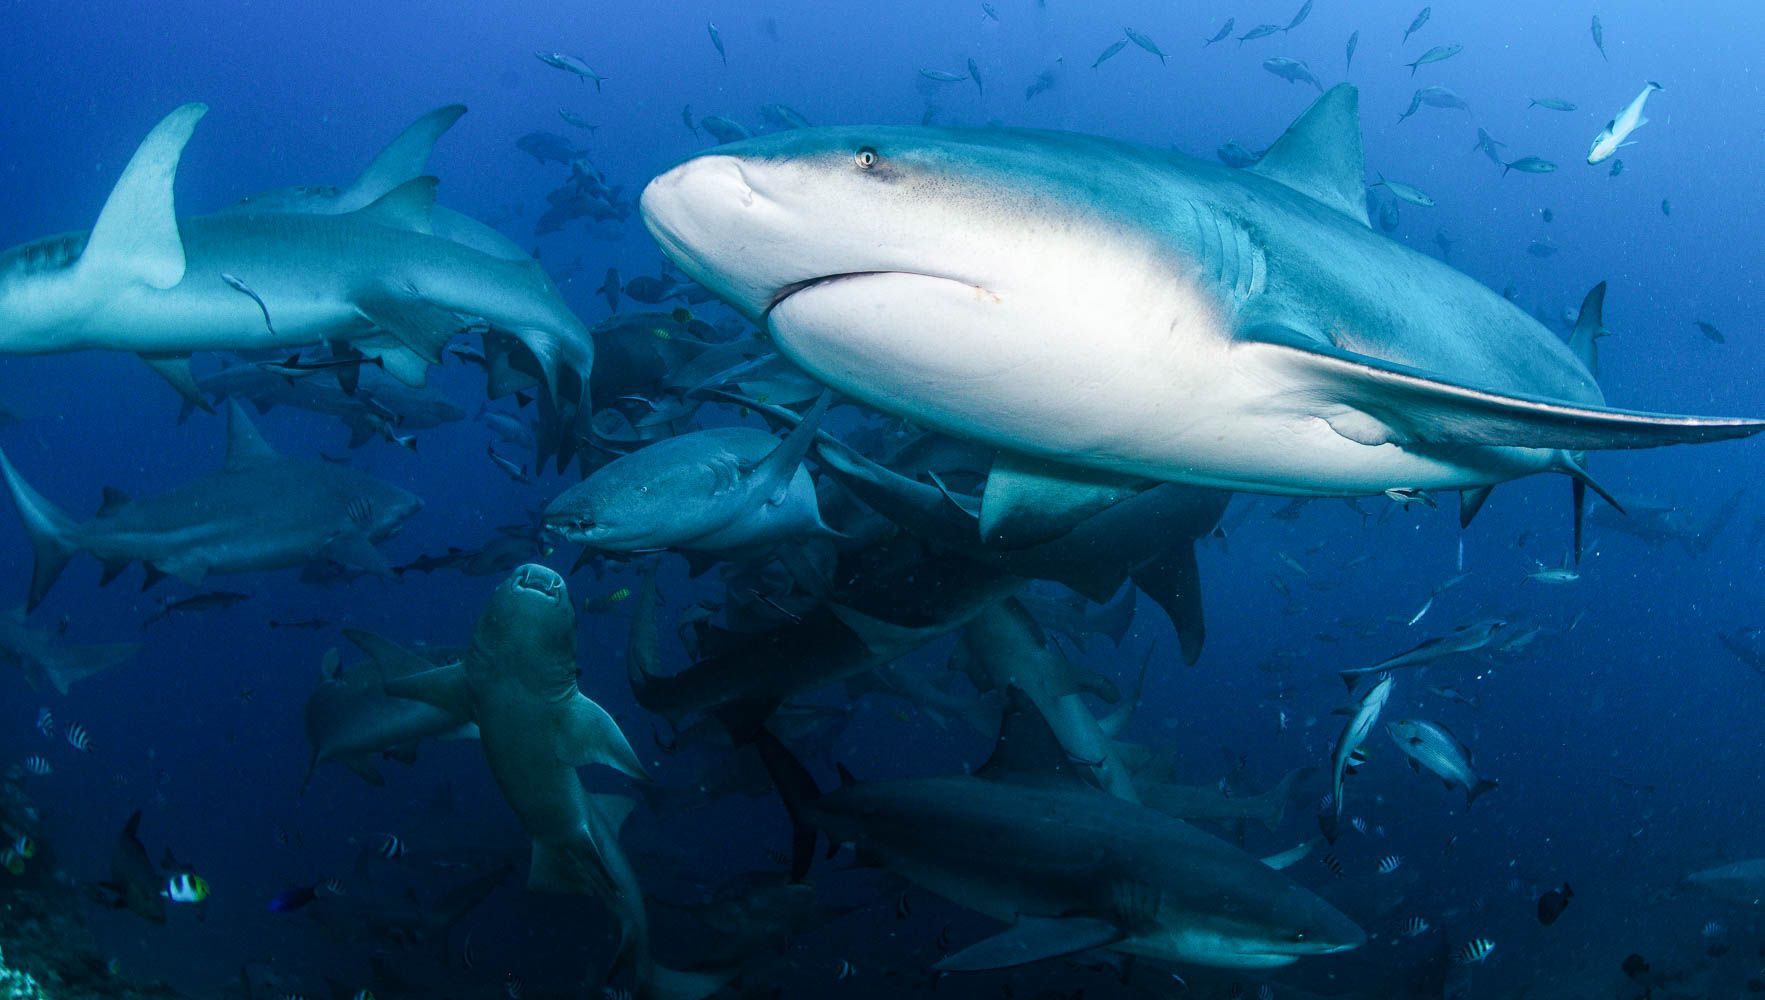 A bull shark is swimming in the foreground against a backdrop of feeding sharks in Fiji's blue waters